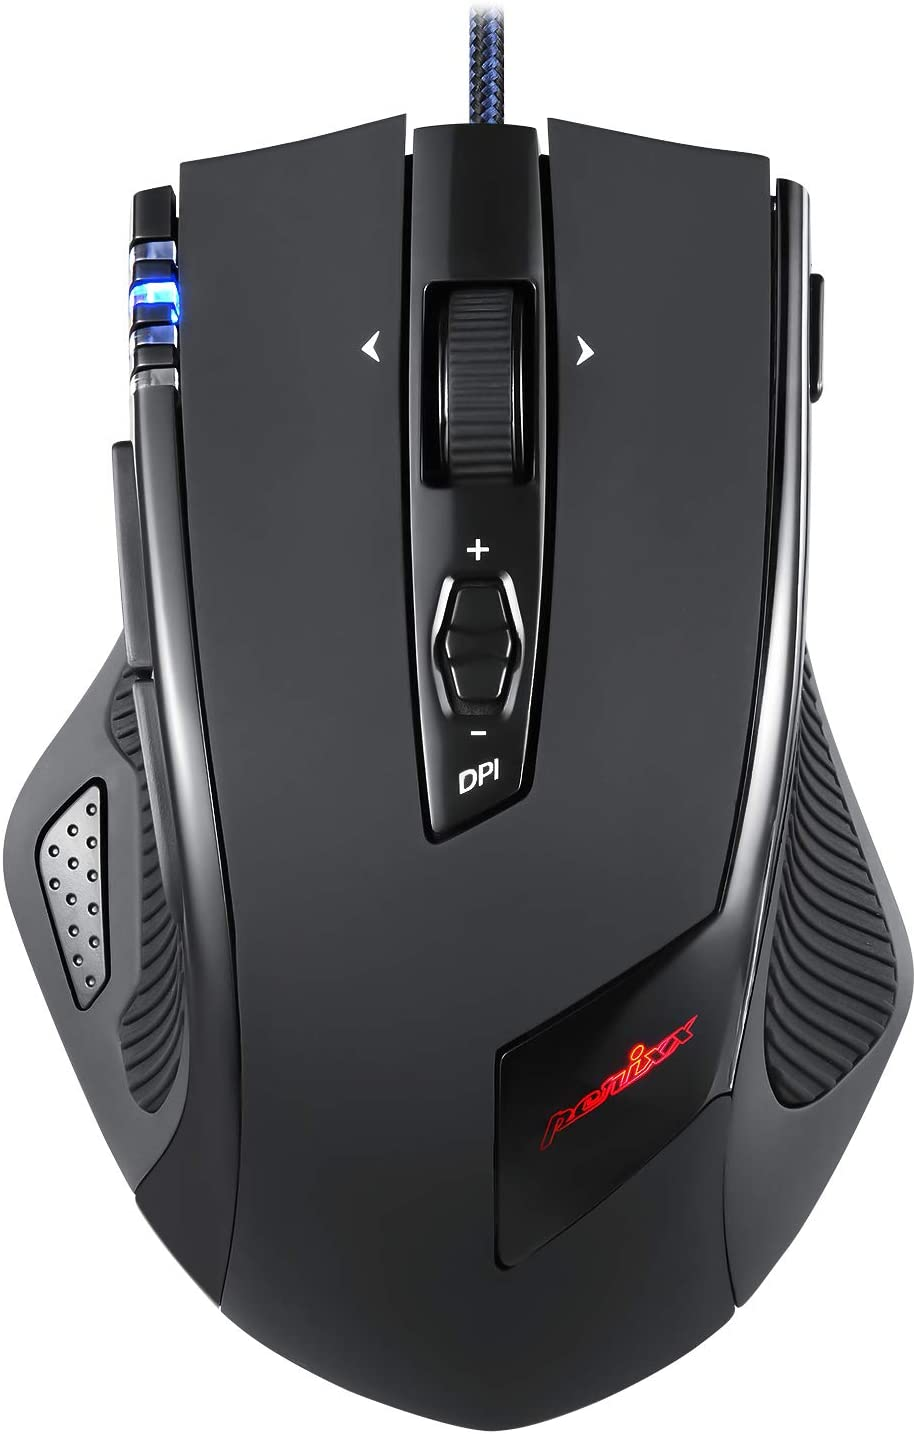 Laser gaming mice are much more sensitive than optical mice, and can be used on just about any surface for completing tasks and for gaming.